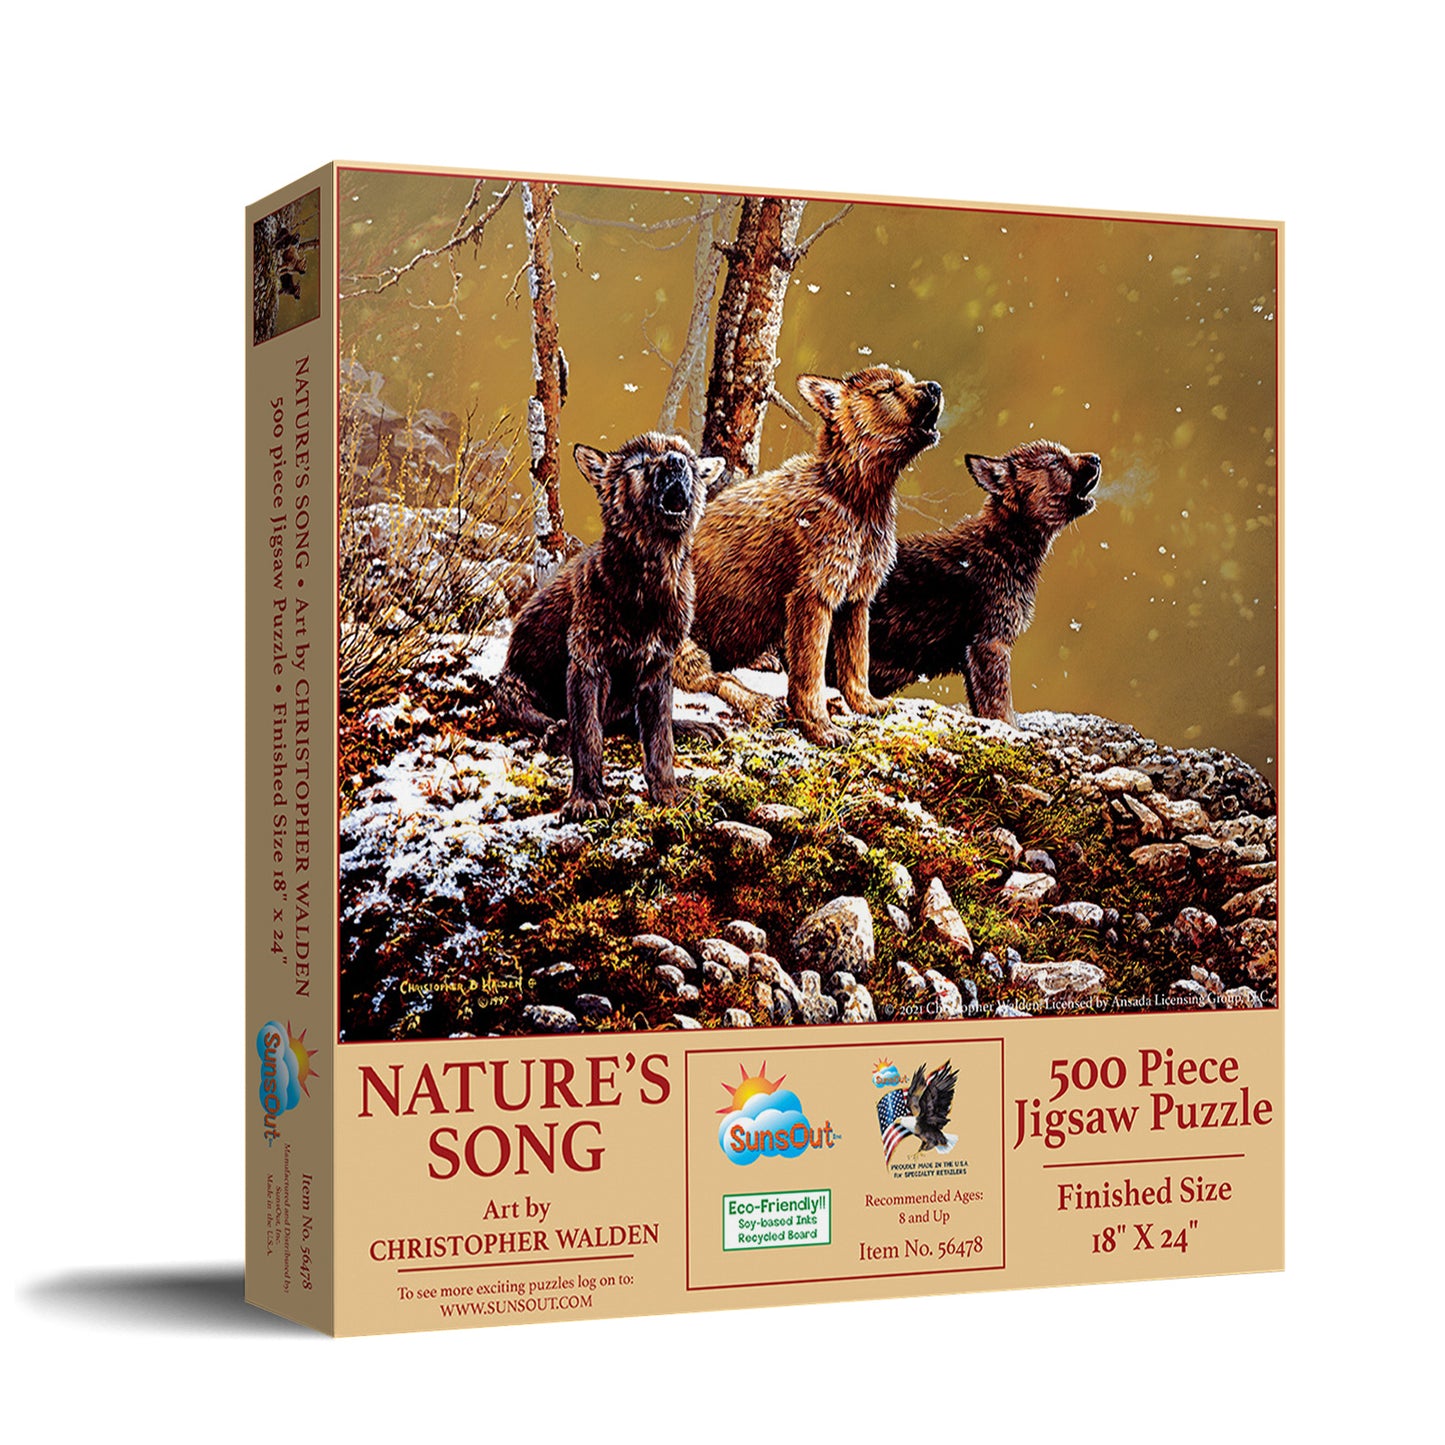 Nature's Song - 500 Piece Jigsaw Puzzle